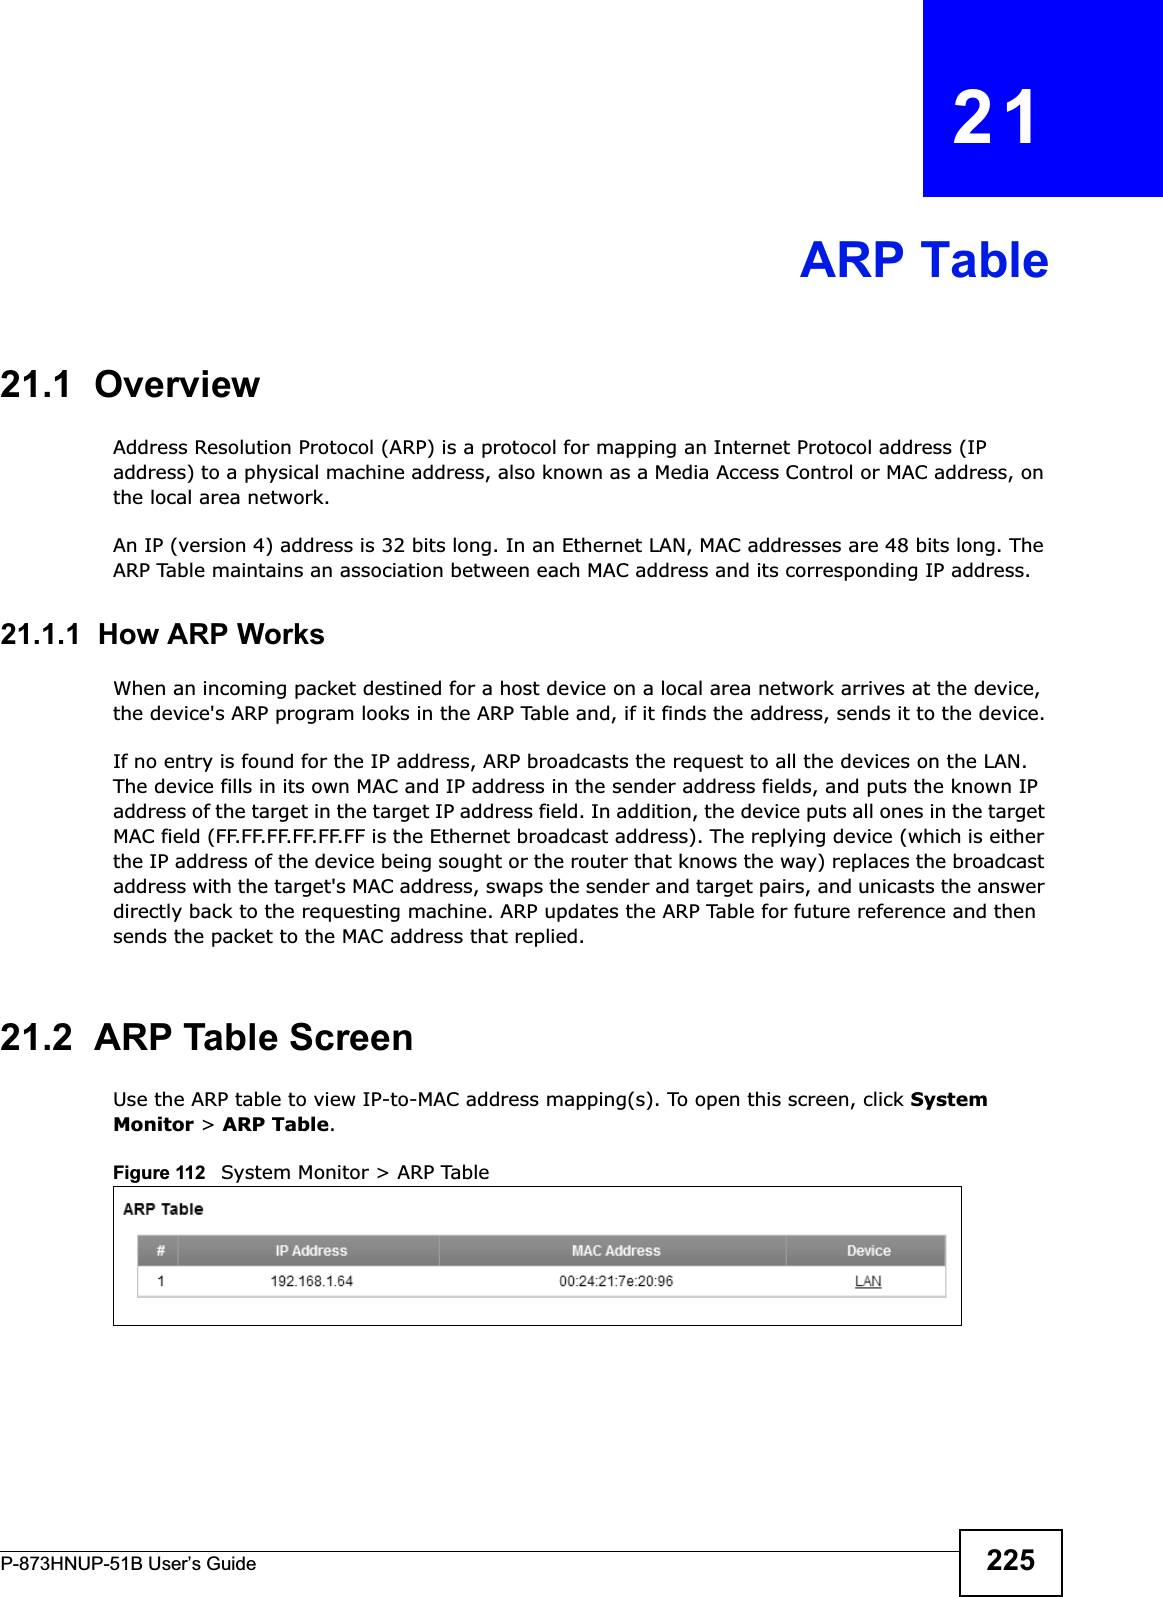 P-873HNUP-51B User’s Guide 225CHAPTER   21ARP Table21.1  OverviewAddress Resolution Protocol (ARP) is a protocol for mapping an Internet Protocol address (IP address) to a physical machine address, also known as a Media Access Control or MAC address, on the local area network. An IP (version 4) address is 32 bits long. In an Ethernet LAN, MAC addresses are 48 bits long. The ARP Table maintains an association between each MAC address and its corresponding IP address. 21.1.1  How ARP WorksWhen an incoming packet destined for a host device on a local area network arrives at the device, the device&apos;s ARP program looks in the ARP Table and, if it finds the address, sends it to the device.If no entry is found for the IP address, ARP broadcasts the request to all the devices on the LAN. The device fills in its own MAC and IP address in the sender address fields, and puts the known IP address of the target in the target IP address field. In addition, the device puts all ones in the target MAC field (FF.FF.FF.FF.FF.FF is the Ethernet broadcast address). The replying device (which is either the IP address of the device being sought or the router that knows the way) replaces the broadcast address with the target&apos;s MAC address, swaps the sender and target pairs, and unicasts the answer directly back to the requesting machine. ARP updates the ARP Table for future reference and then sends the packet to the MAC address that replied. 21.2  ARP Table ScreenUse the ARP table to view IP-to-MAC address mapping(s). To open this screen, click System Monitor &gt; ARP Table.Figure 112   System Monitor &gt; ARP Table